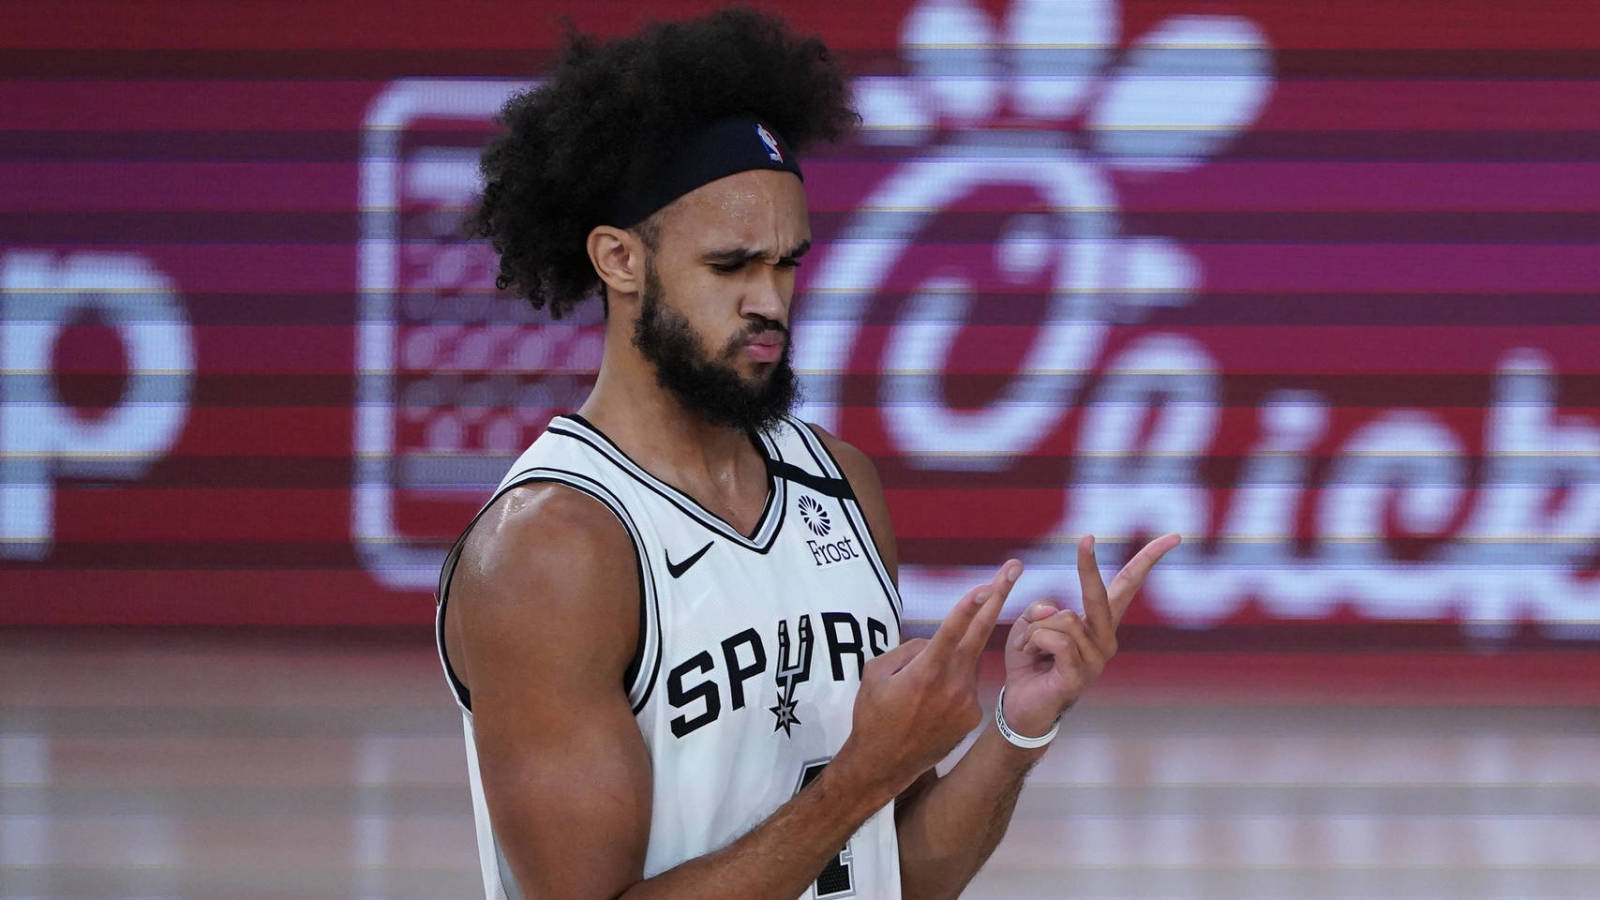 Derrick White: Weatherspoon's style of play is nice to have on the team